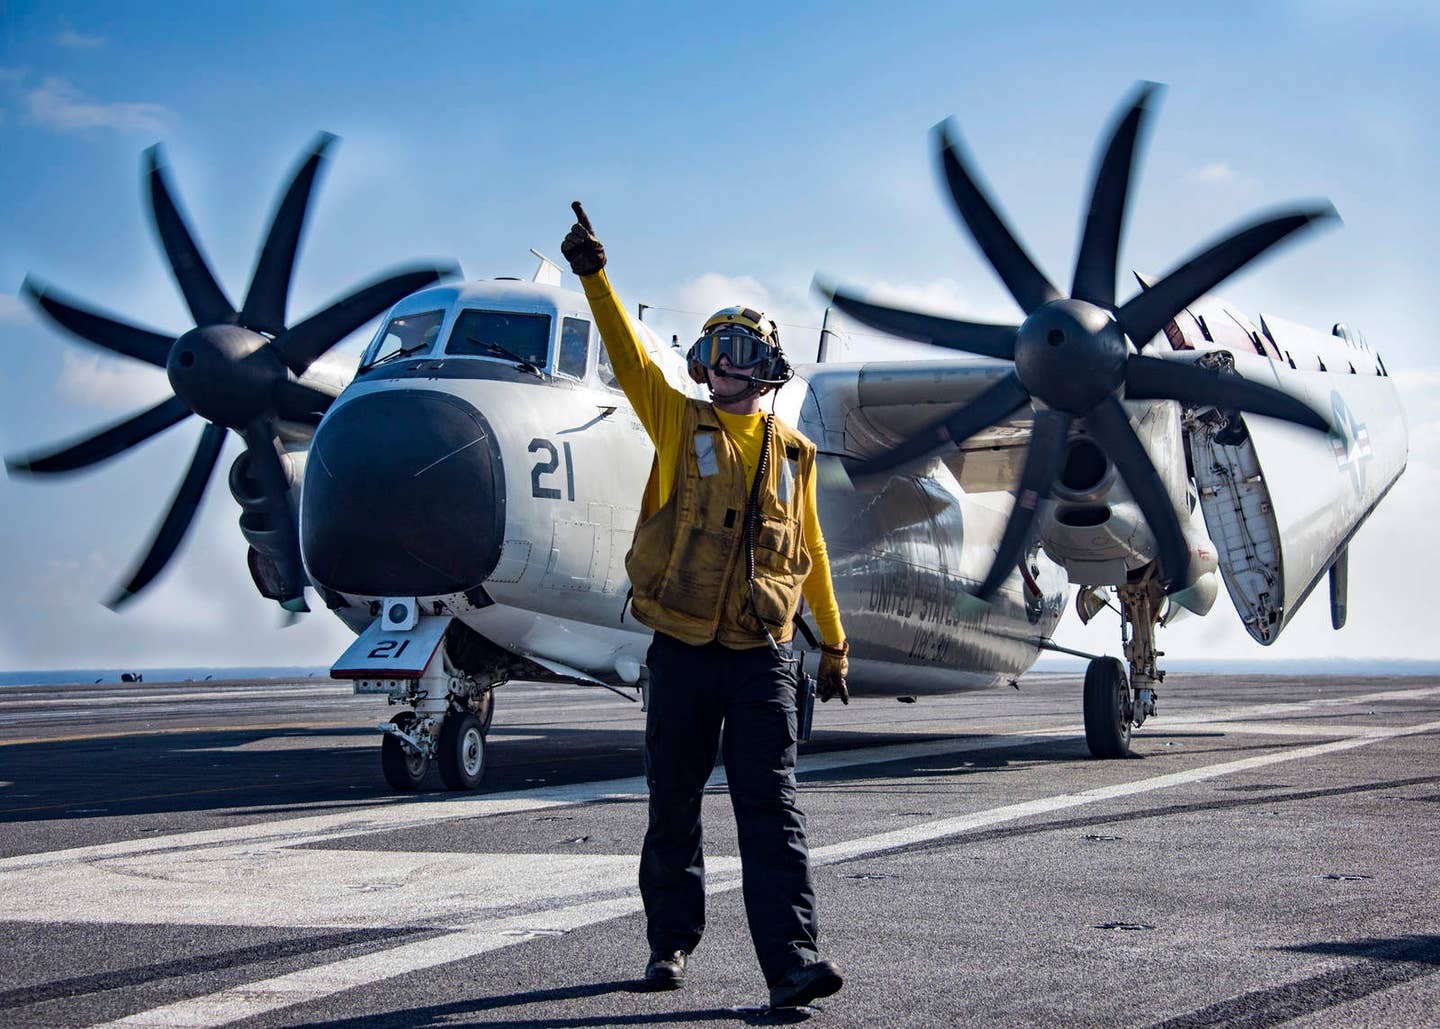 Aviation Boatswains Mate (Handling) 3rd Class Dylan Mills directs the crew of a C-2A Greyhound from Fleet Logistics Support Squadron (VRC) 30 aboard the aircraft carrier USS Carl Vinson (CVN 70). (U.S. Navy Photo by Mass Communication Specialist 2nd Class Sean M. Castellano)